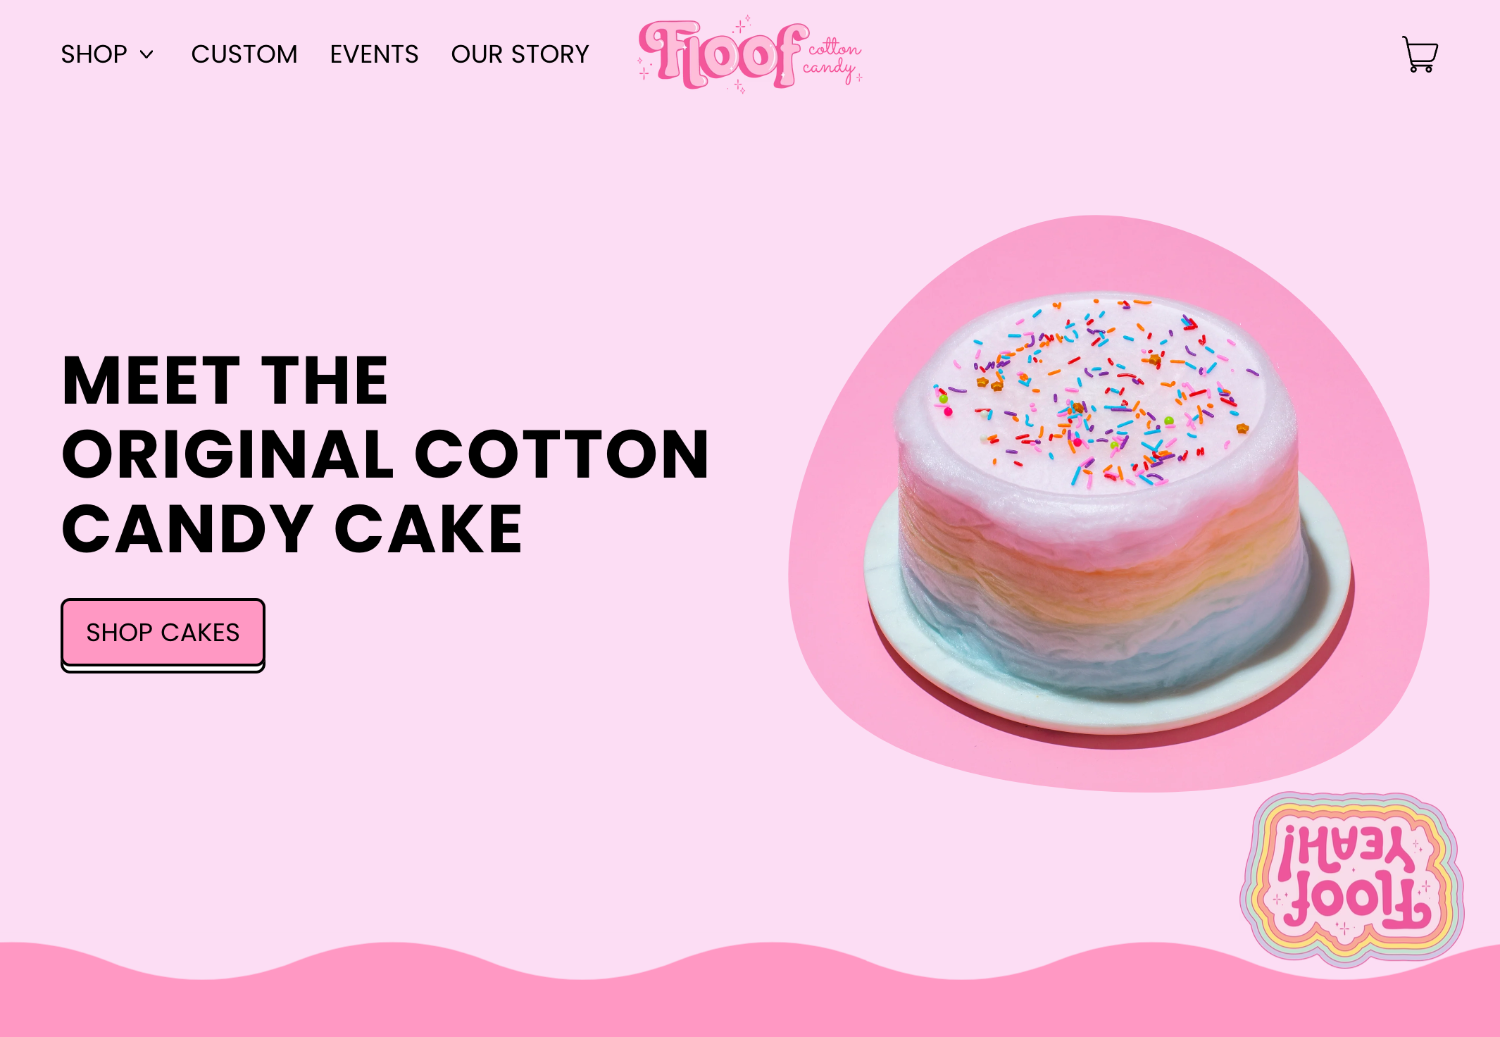 Homepage for Floof cotton Candy brand